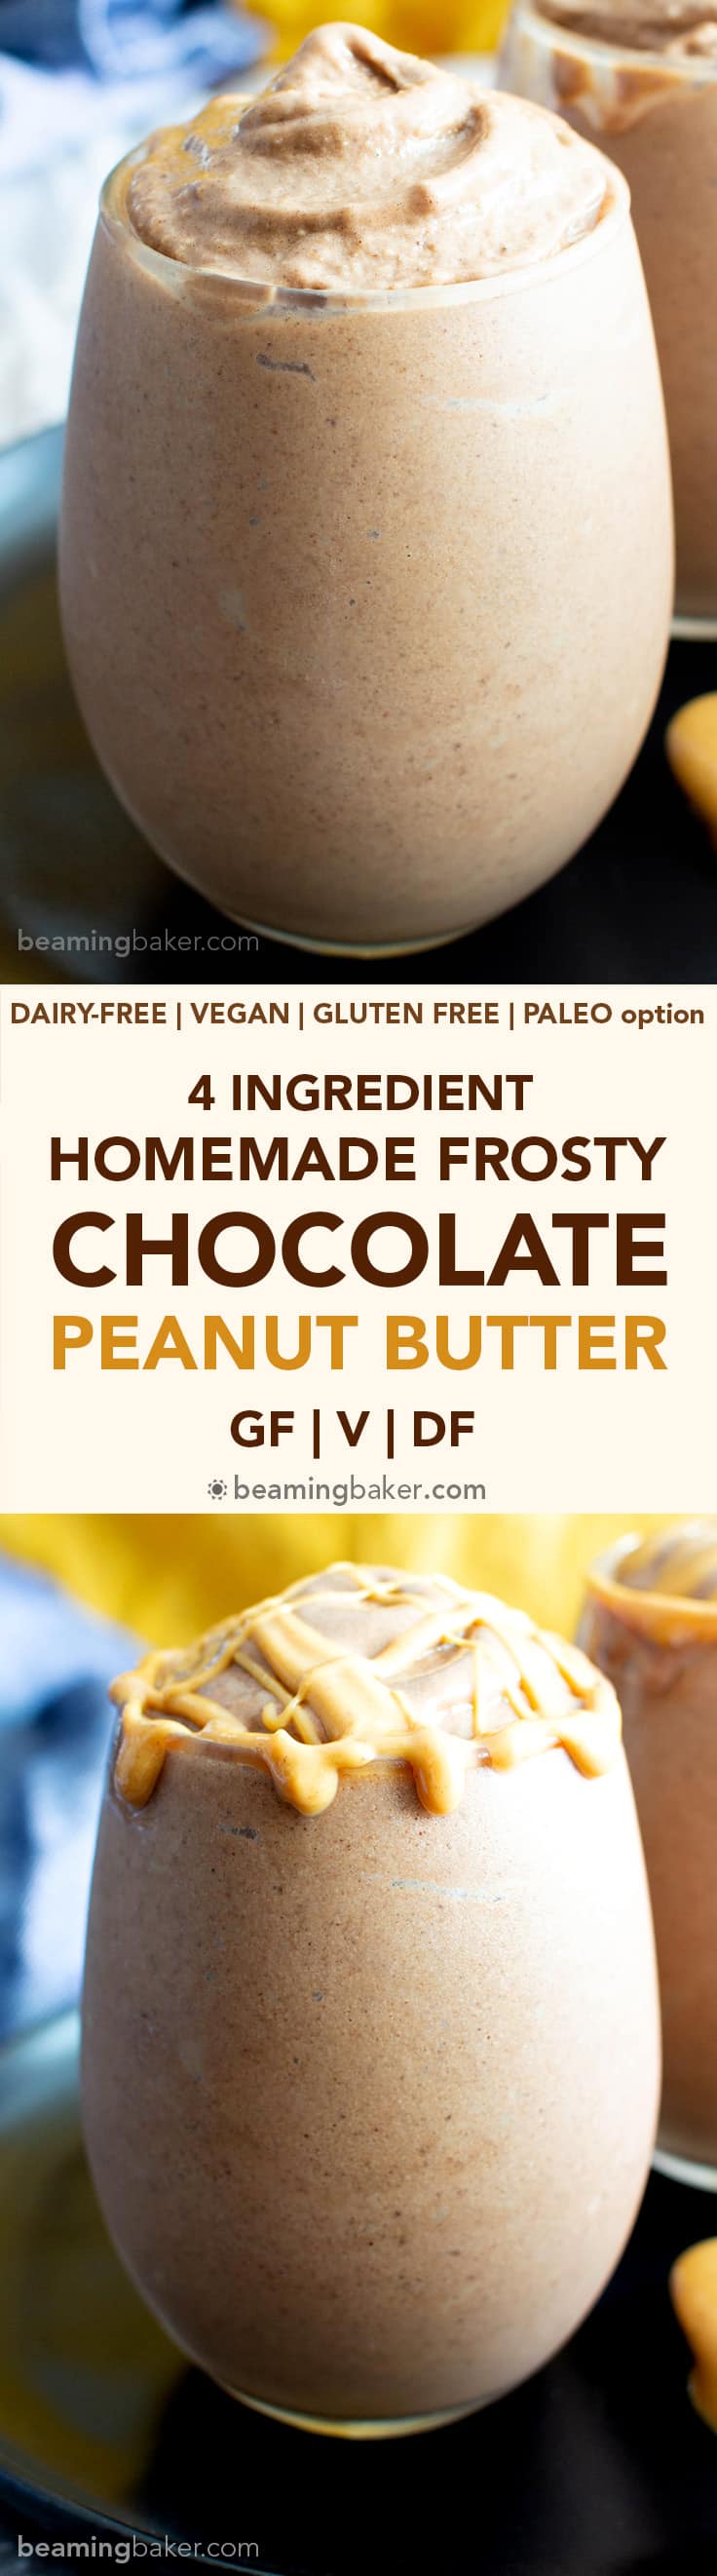 4 Ingredient Chocolate Peanut Butter Homemade Frosty Recipe (V+GF): an easy, 5-minute recipe for a thick ‘n creamy homemade Wendy’s frosty made with just 4 healthy ingredients! #Vegan #GlutenFree #DairyFree #Paleo option, #NoAddedSugar #RefinedSugarFree #FrozenDesserts | Recipe at BeamingBaker.com